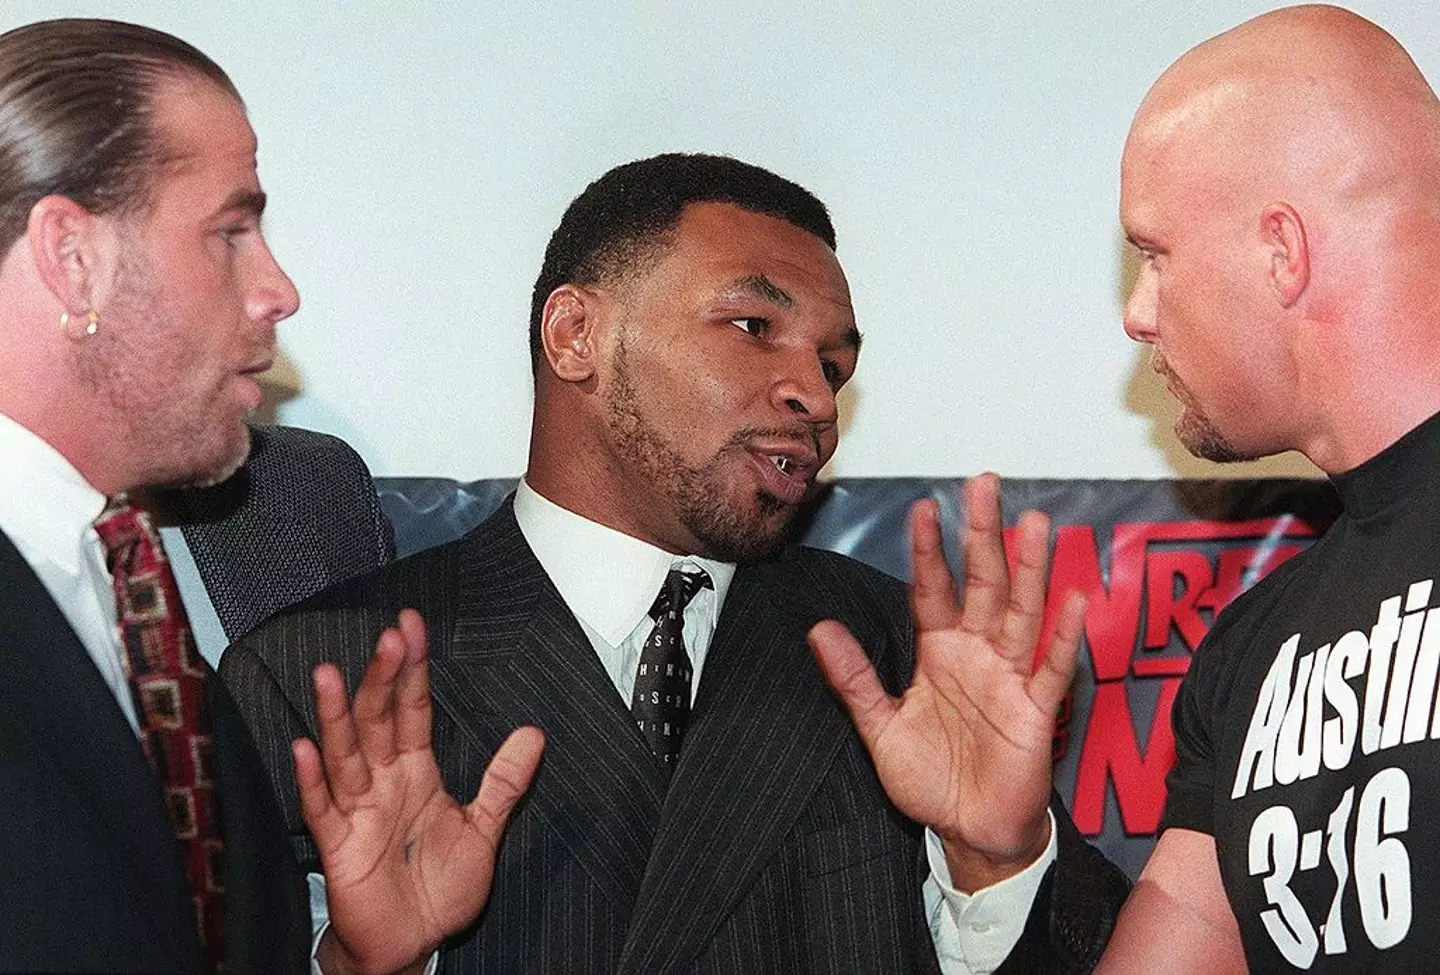 Mike Tyson pictured with Shawn Michaels (left) and 'Stone Cold' Steve Austin (right) before WrestleMania 14 (